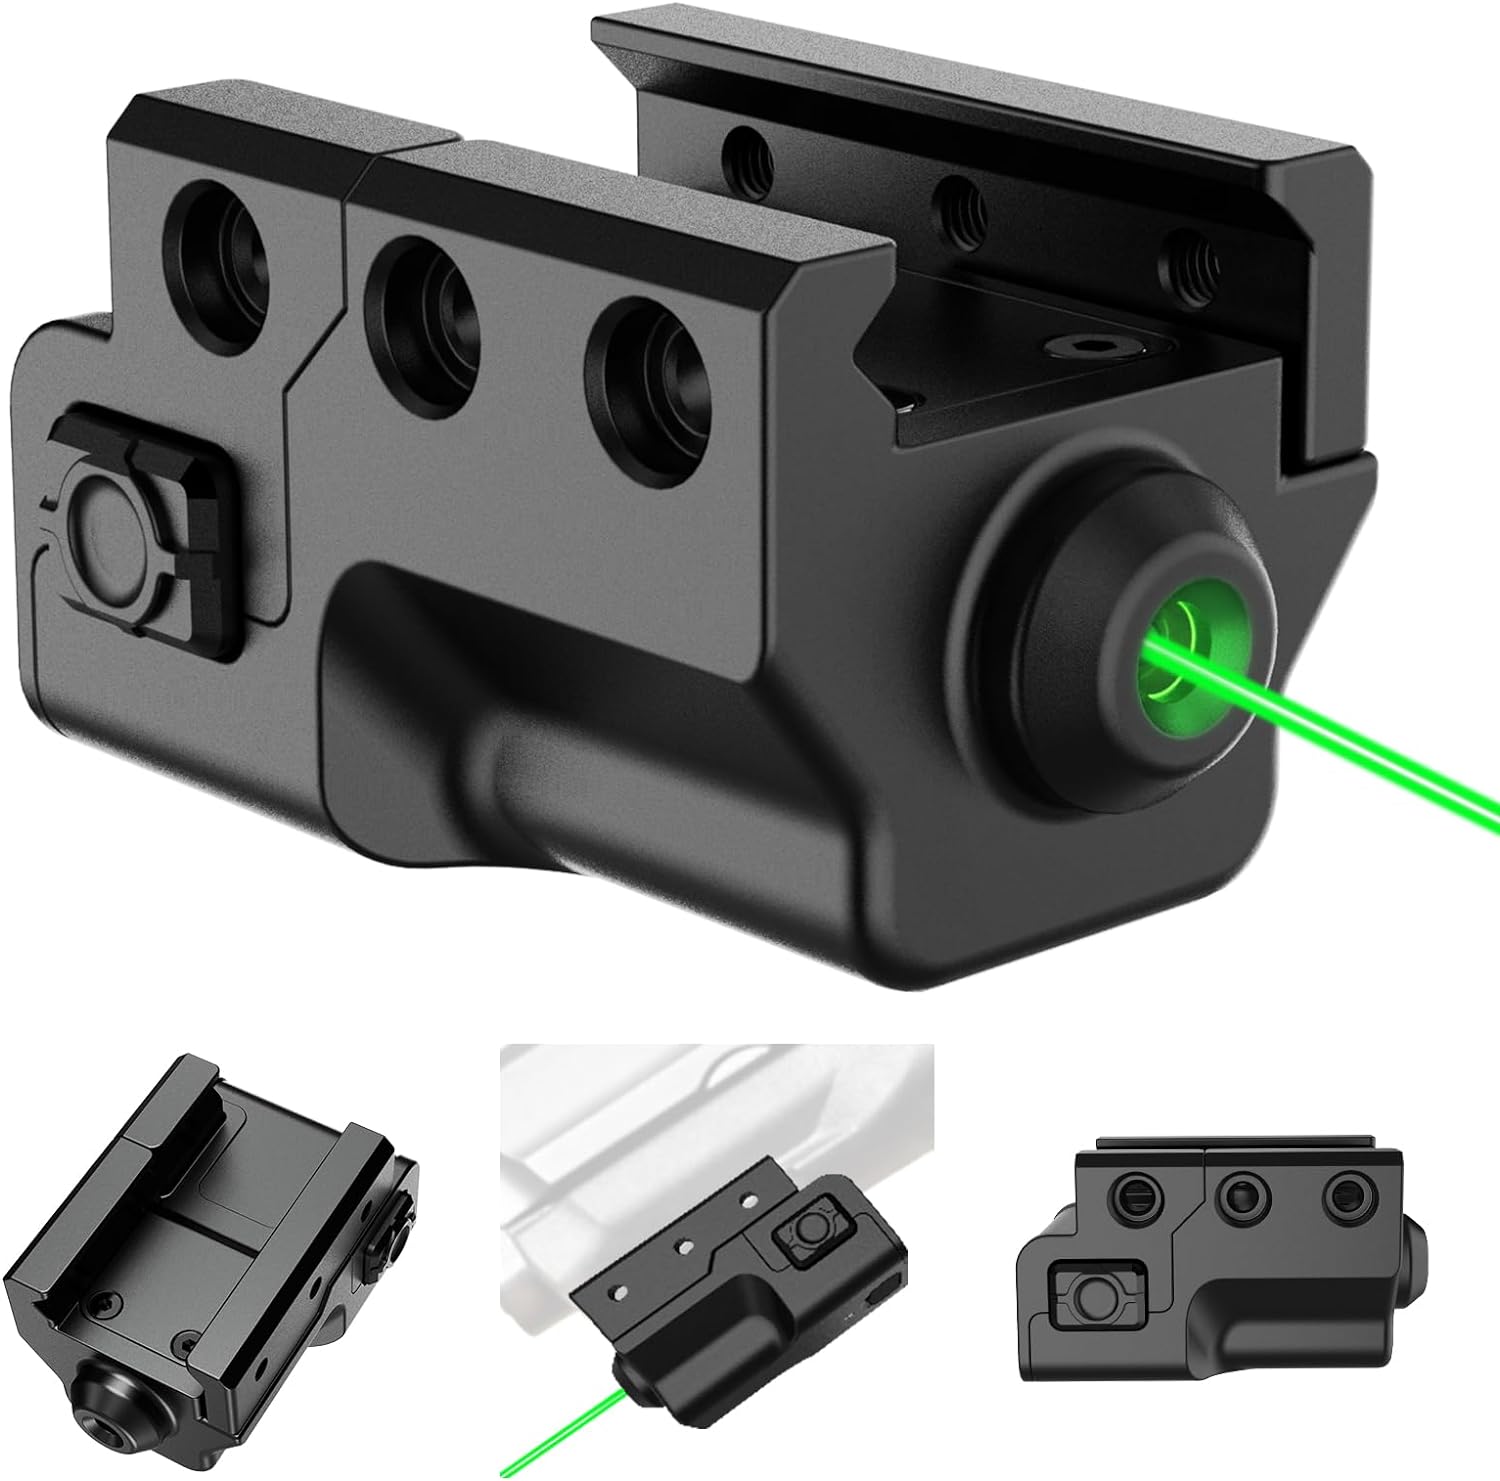 Tactical Green Laser Sight for Picatinny Weaver Rail Mount for  Pistol,Handgun with USB Rechargeable Airsoft Green Laser Hunting